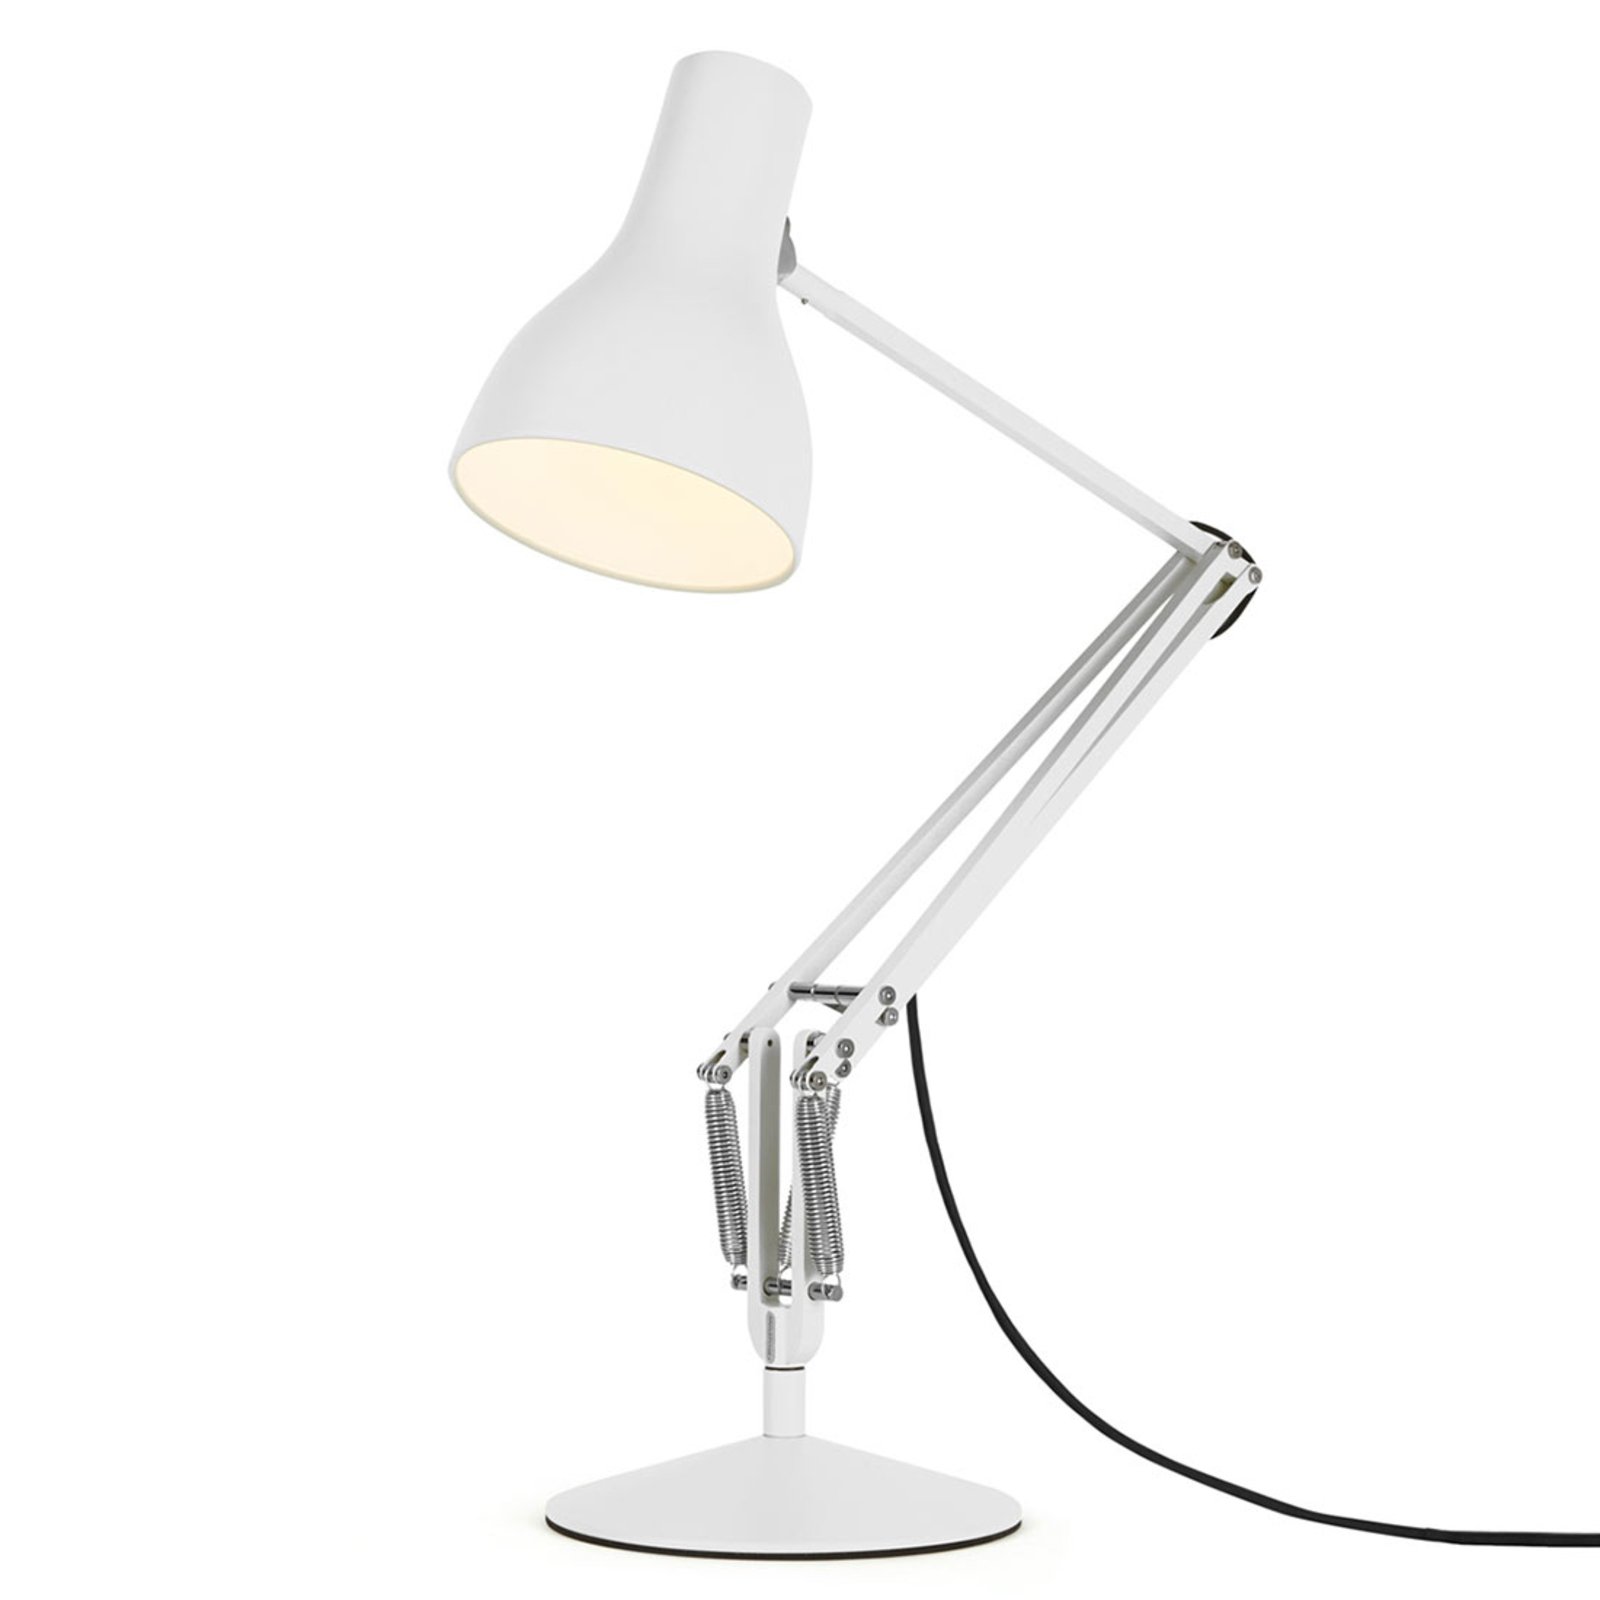 Anglepoise Type 75 table lamp alpine white